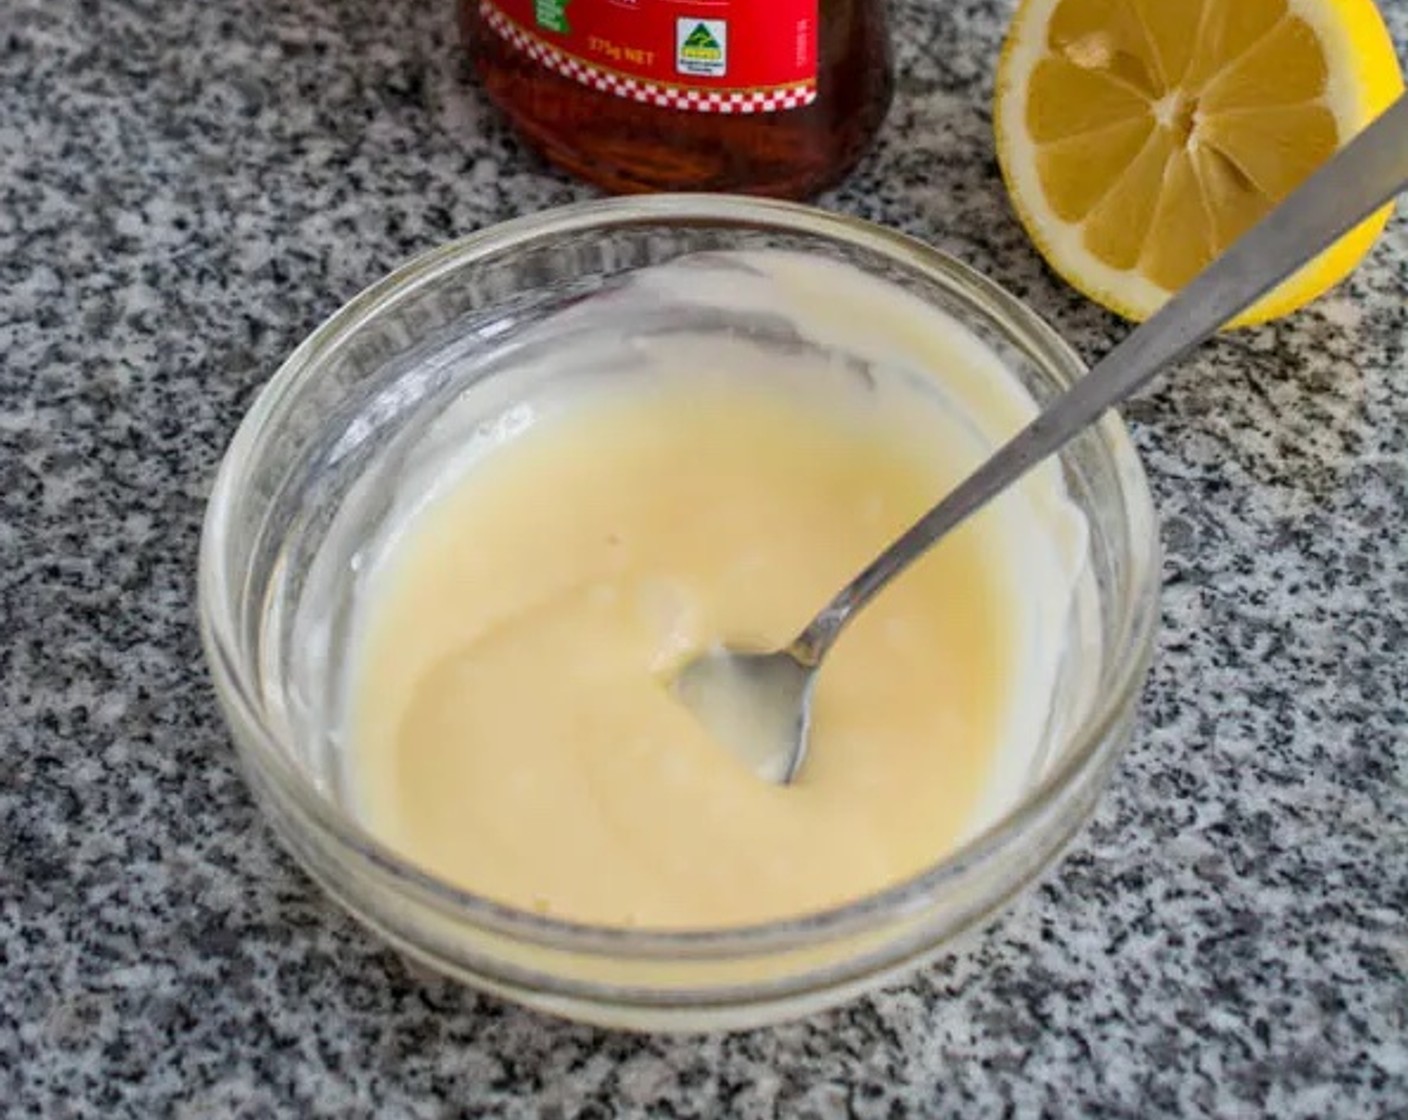 step 9 Make the creamy sauce by combining Mayonnaise (3 Tbsp), Honey (1 1/2 Tbsp), Sweetened Condensed Milk (1 Tbsp), and Lemon (1) in a small bowl. Stir well.